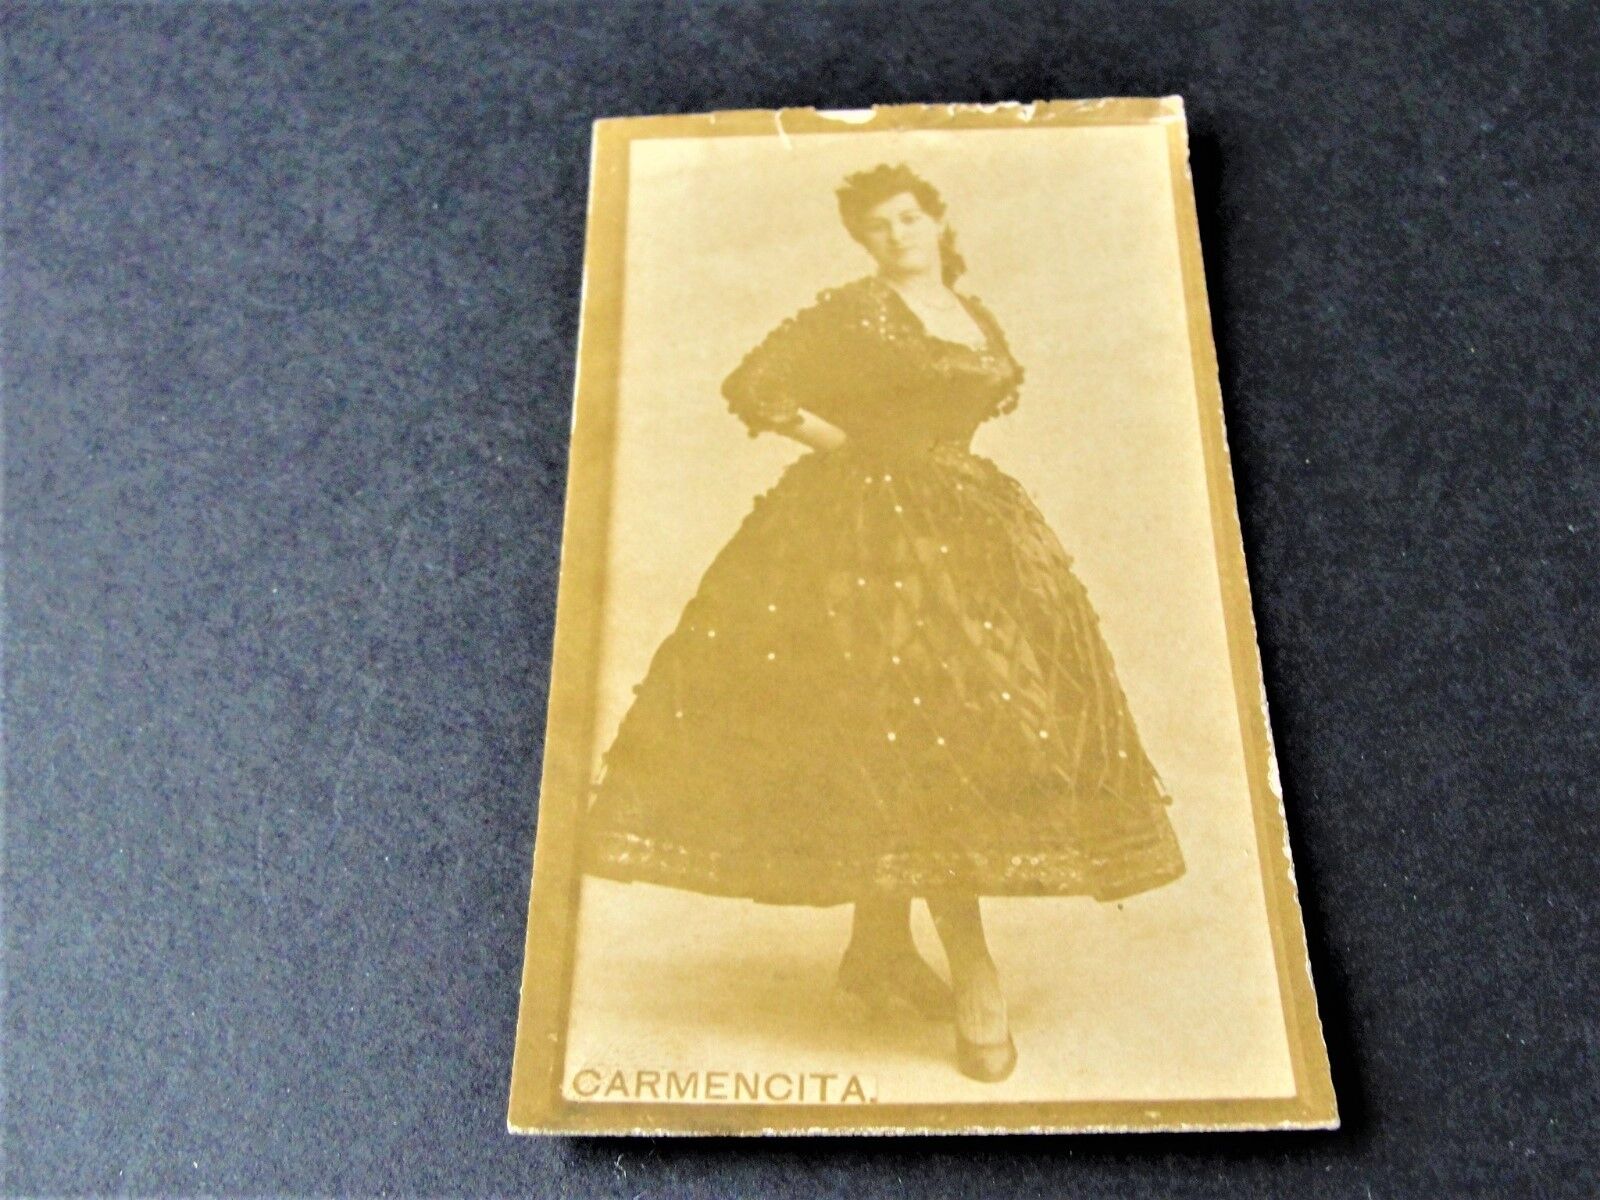 Antique G.W. Gail & Ax's Navy Tobacco Card with image of Actress Carmencita.  